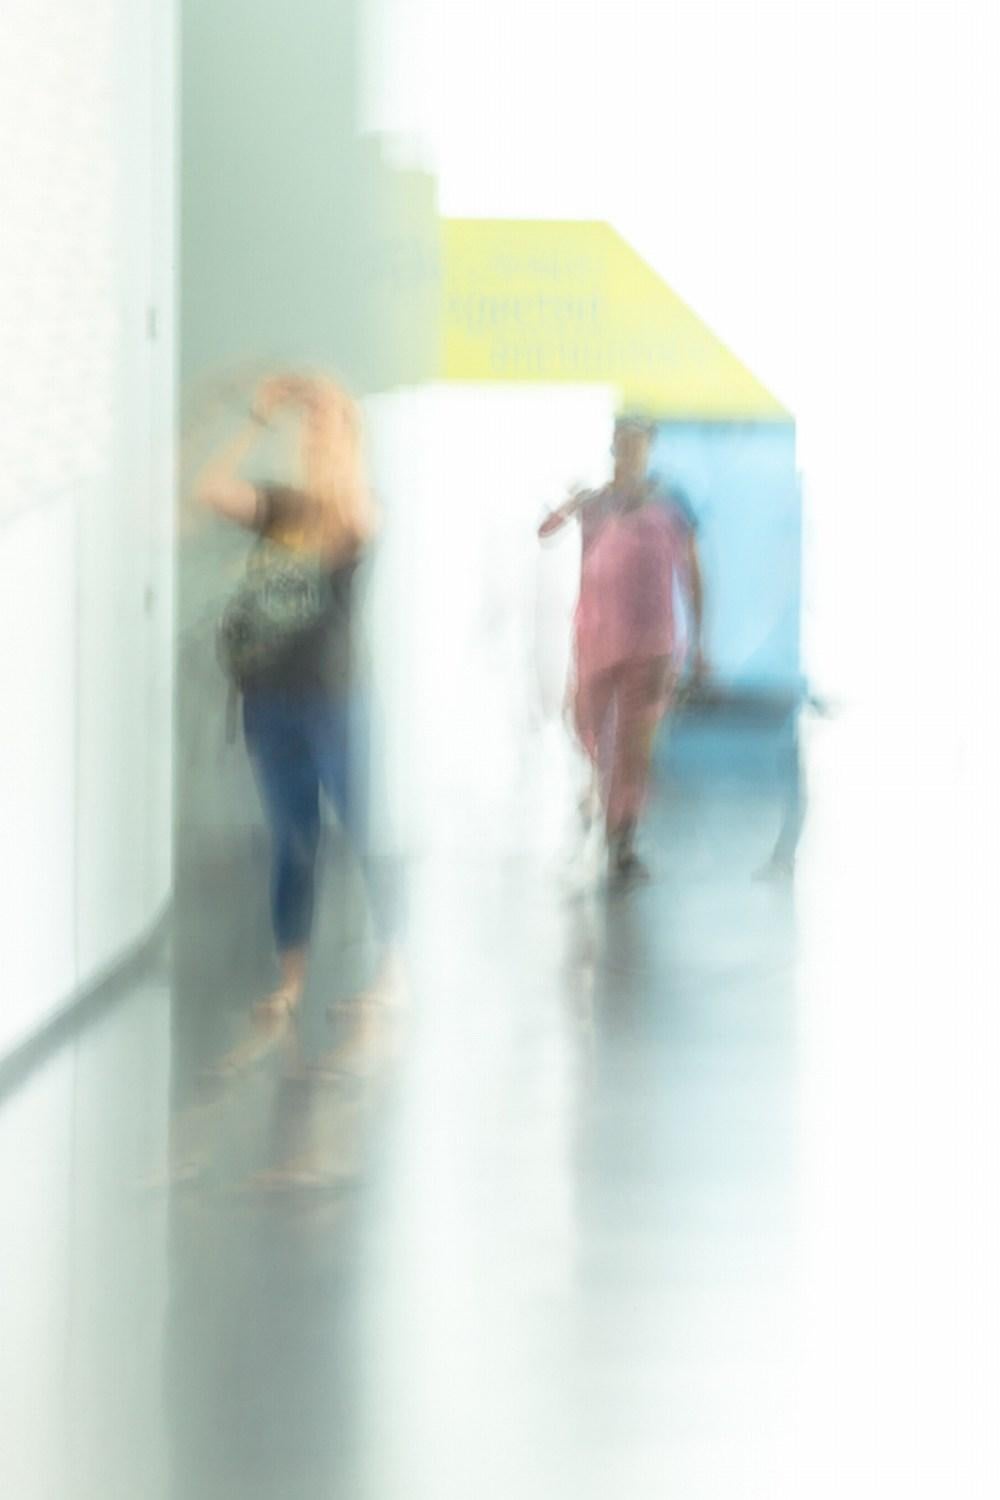 Untitled #24 (from Unfocused Series)